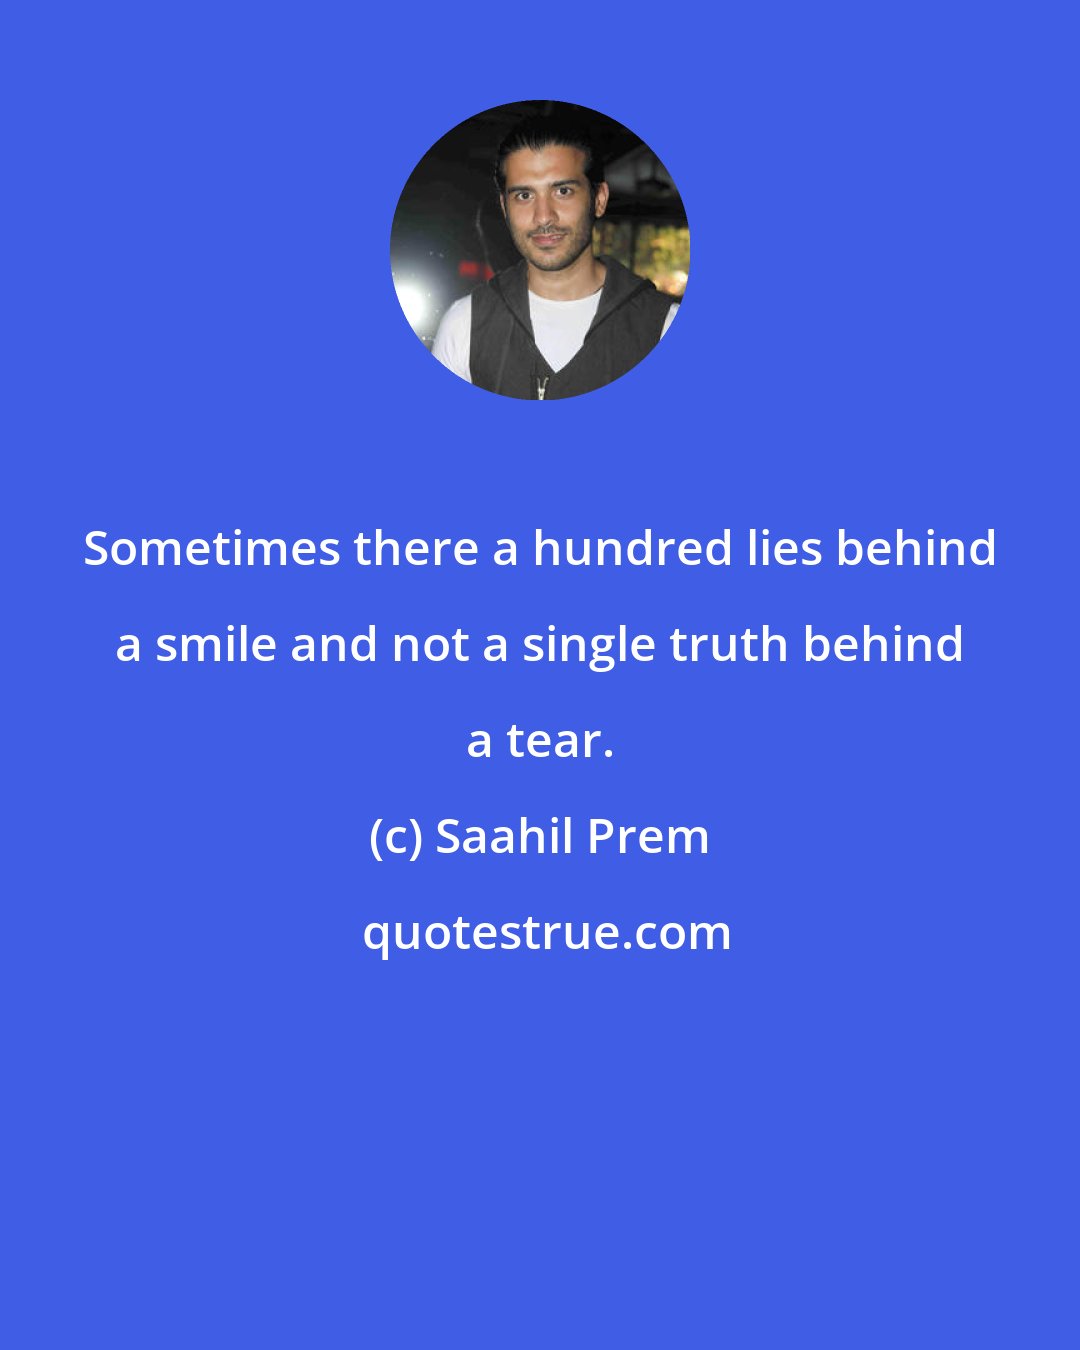 Saahil Prem: Sometimes there a hundred lies behind a smile and not a single truth behind a tear.